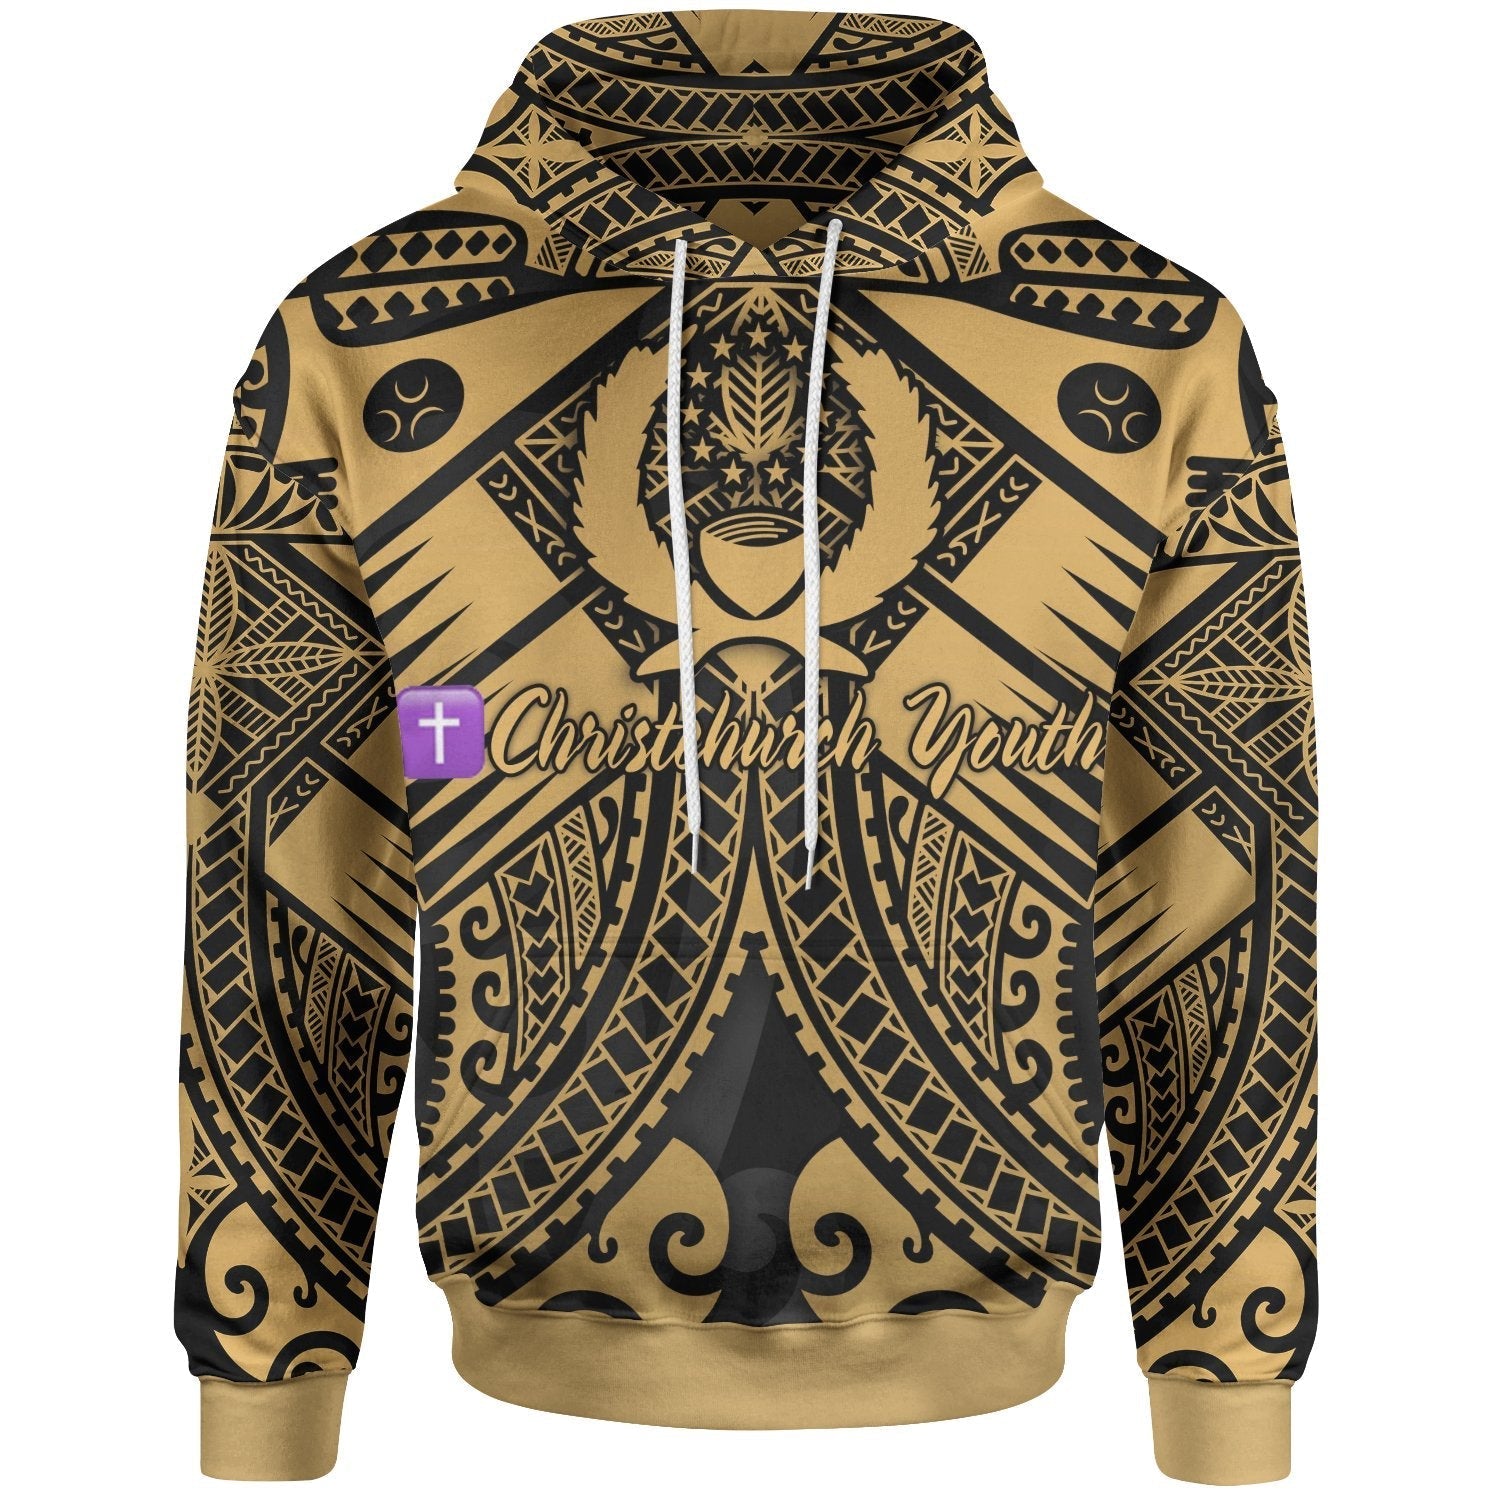 christchurch-youth-pohnpei-custom-personalised-hoodie-gold-seal-with-polynesian-tattoo